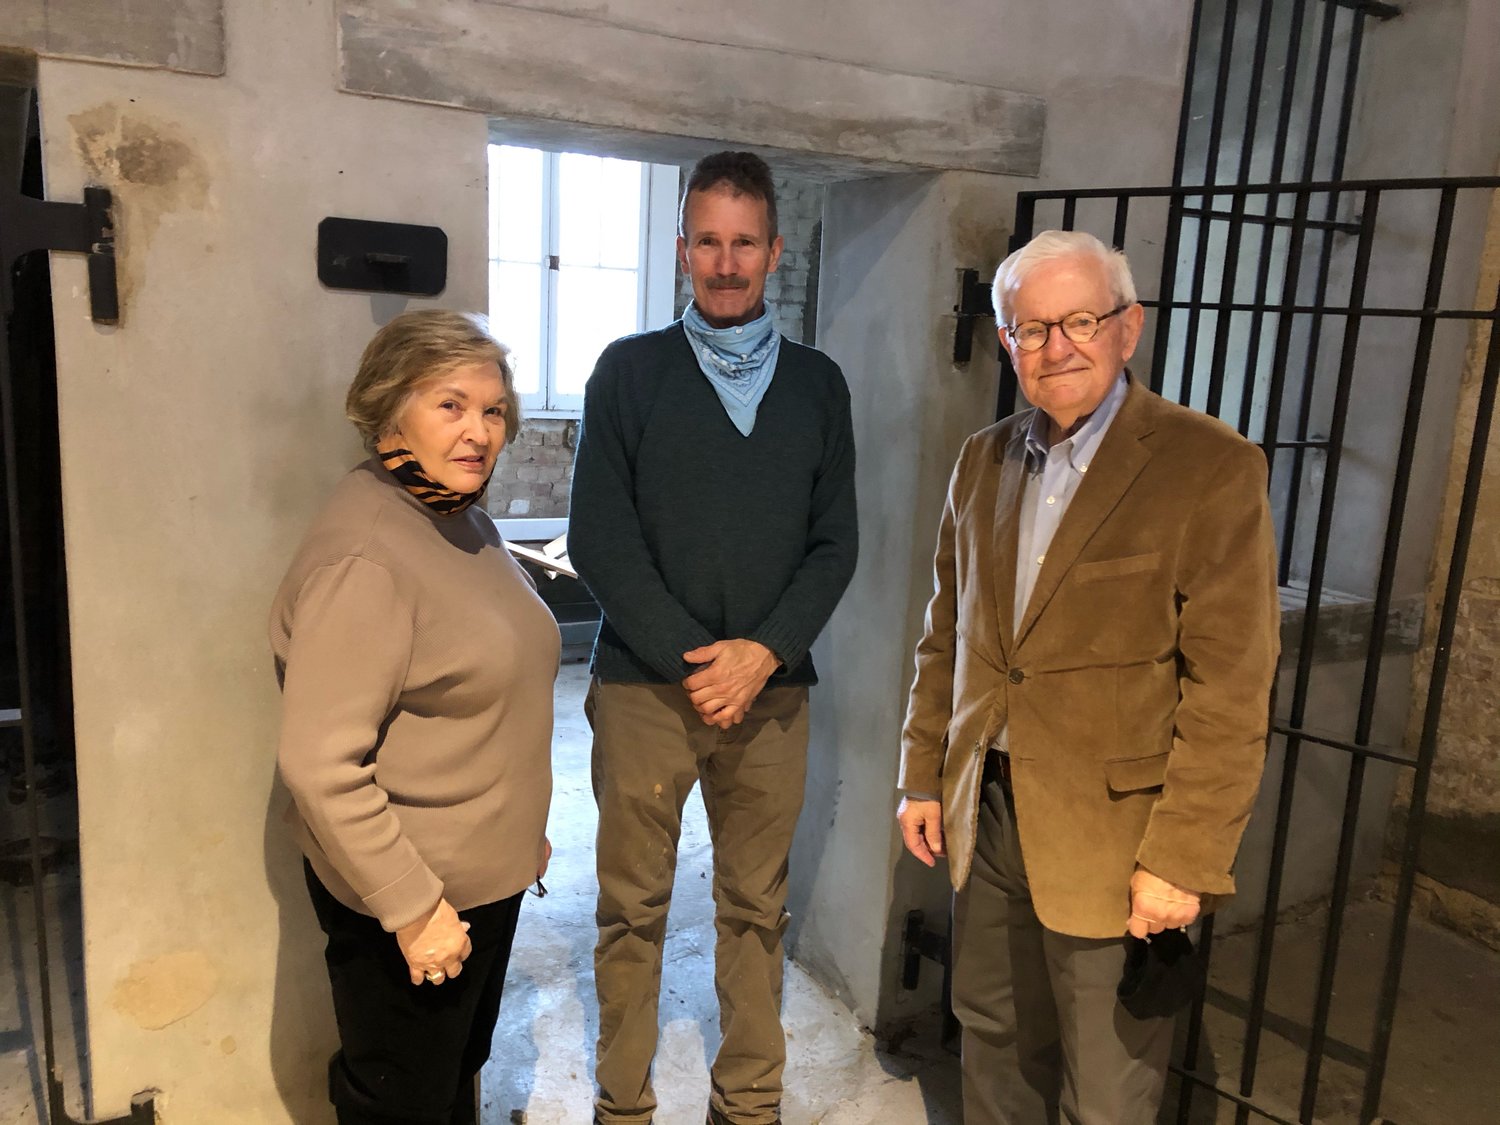 Canton-Madison County Historical Society members stand in front of one of the old jail cells in the 150-year-old Old Madison County Jail located in the heart of Canton. Pictured, from left: Maureen Simpson, Bill Dinkins, and Bob Montgomery.